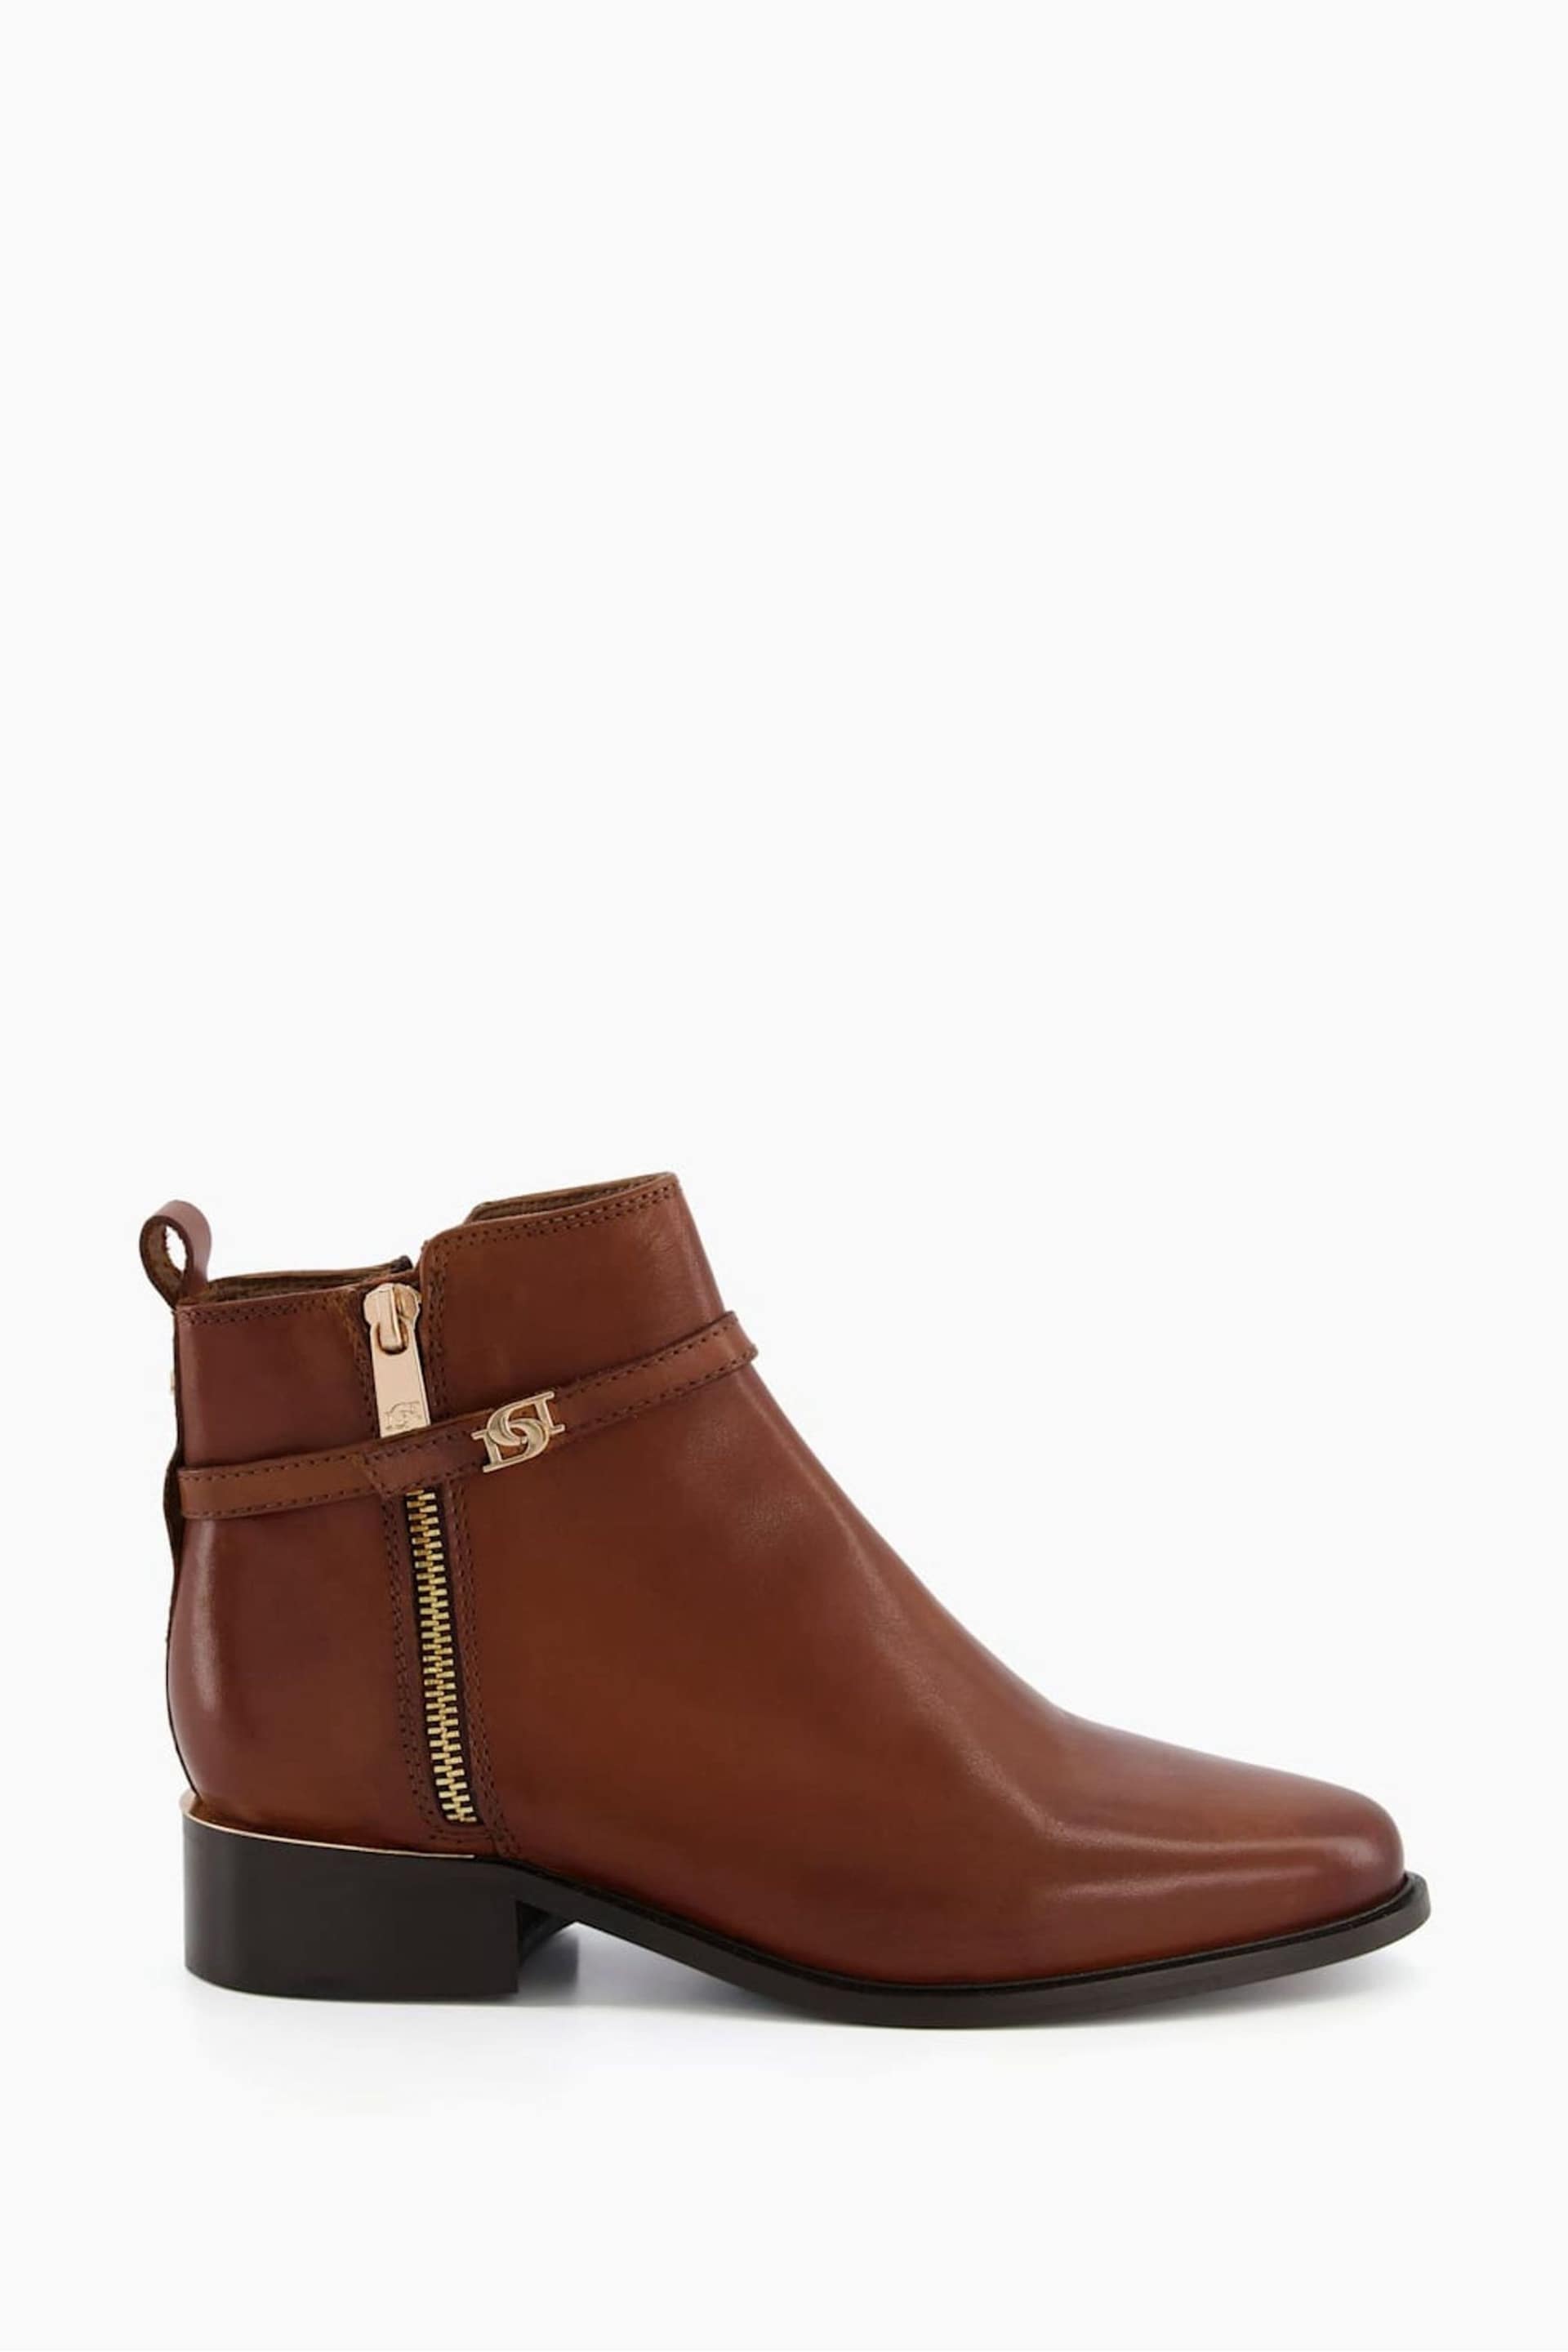 Dune London Brown Wide Fit Pap Buckle Trim Ankle Boots - Image 1 of 5